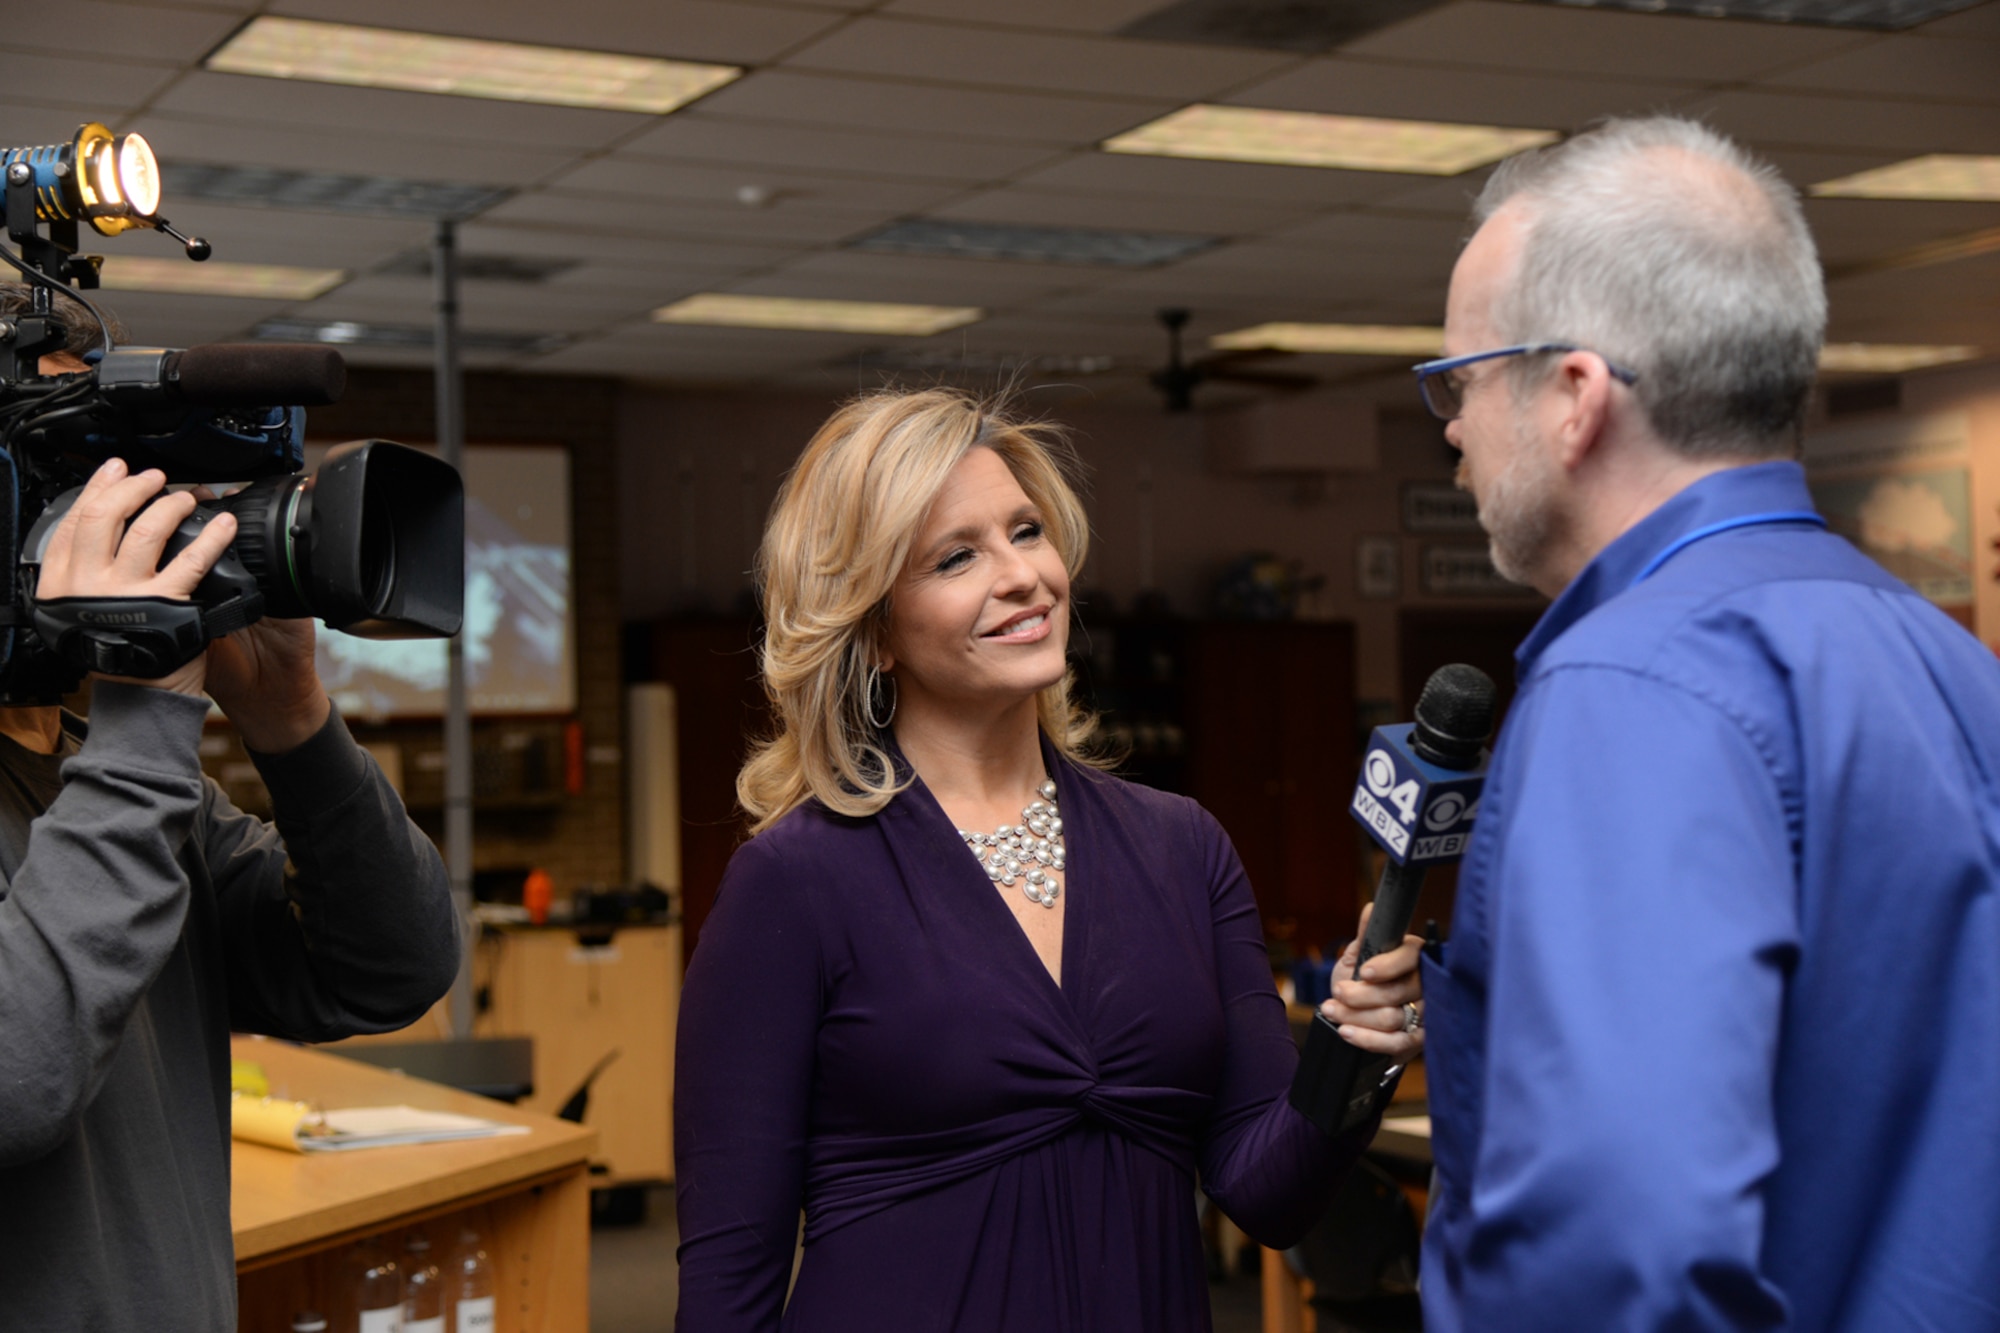 Boston news anchor Paula Ebben, WBZ-TV (CBS), interviews Peter Holden, STARBASE director, at Hanscom Air Force Base, Mass., March 20. The STARBASE Academy at Hanscom is one of more than 50 STARBASE STEM education programs located on military bases across the United States and is a Department of Defense education initiative. (U.S. Air Force photo by Linda LaBonte-Britt)